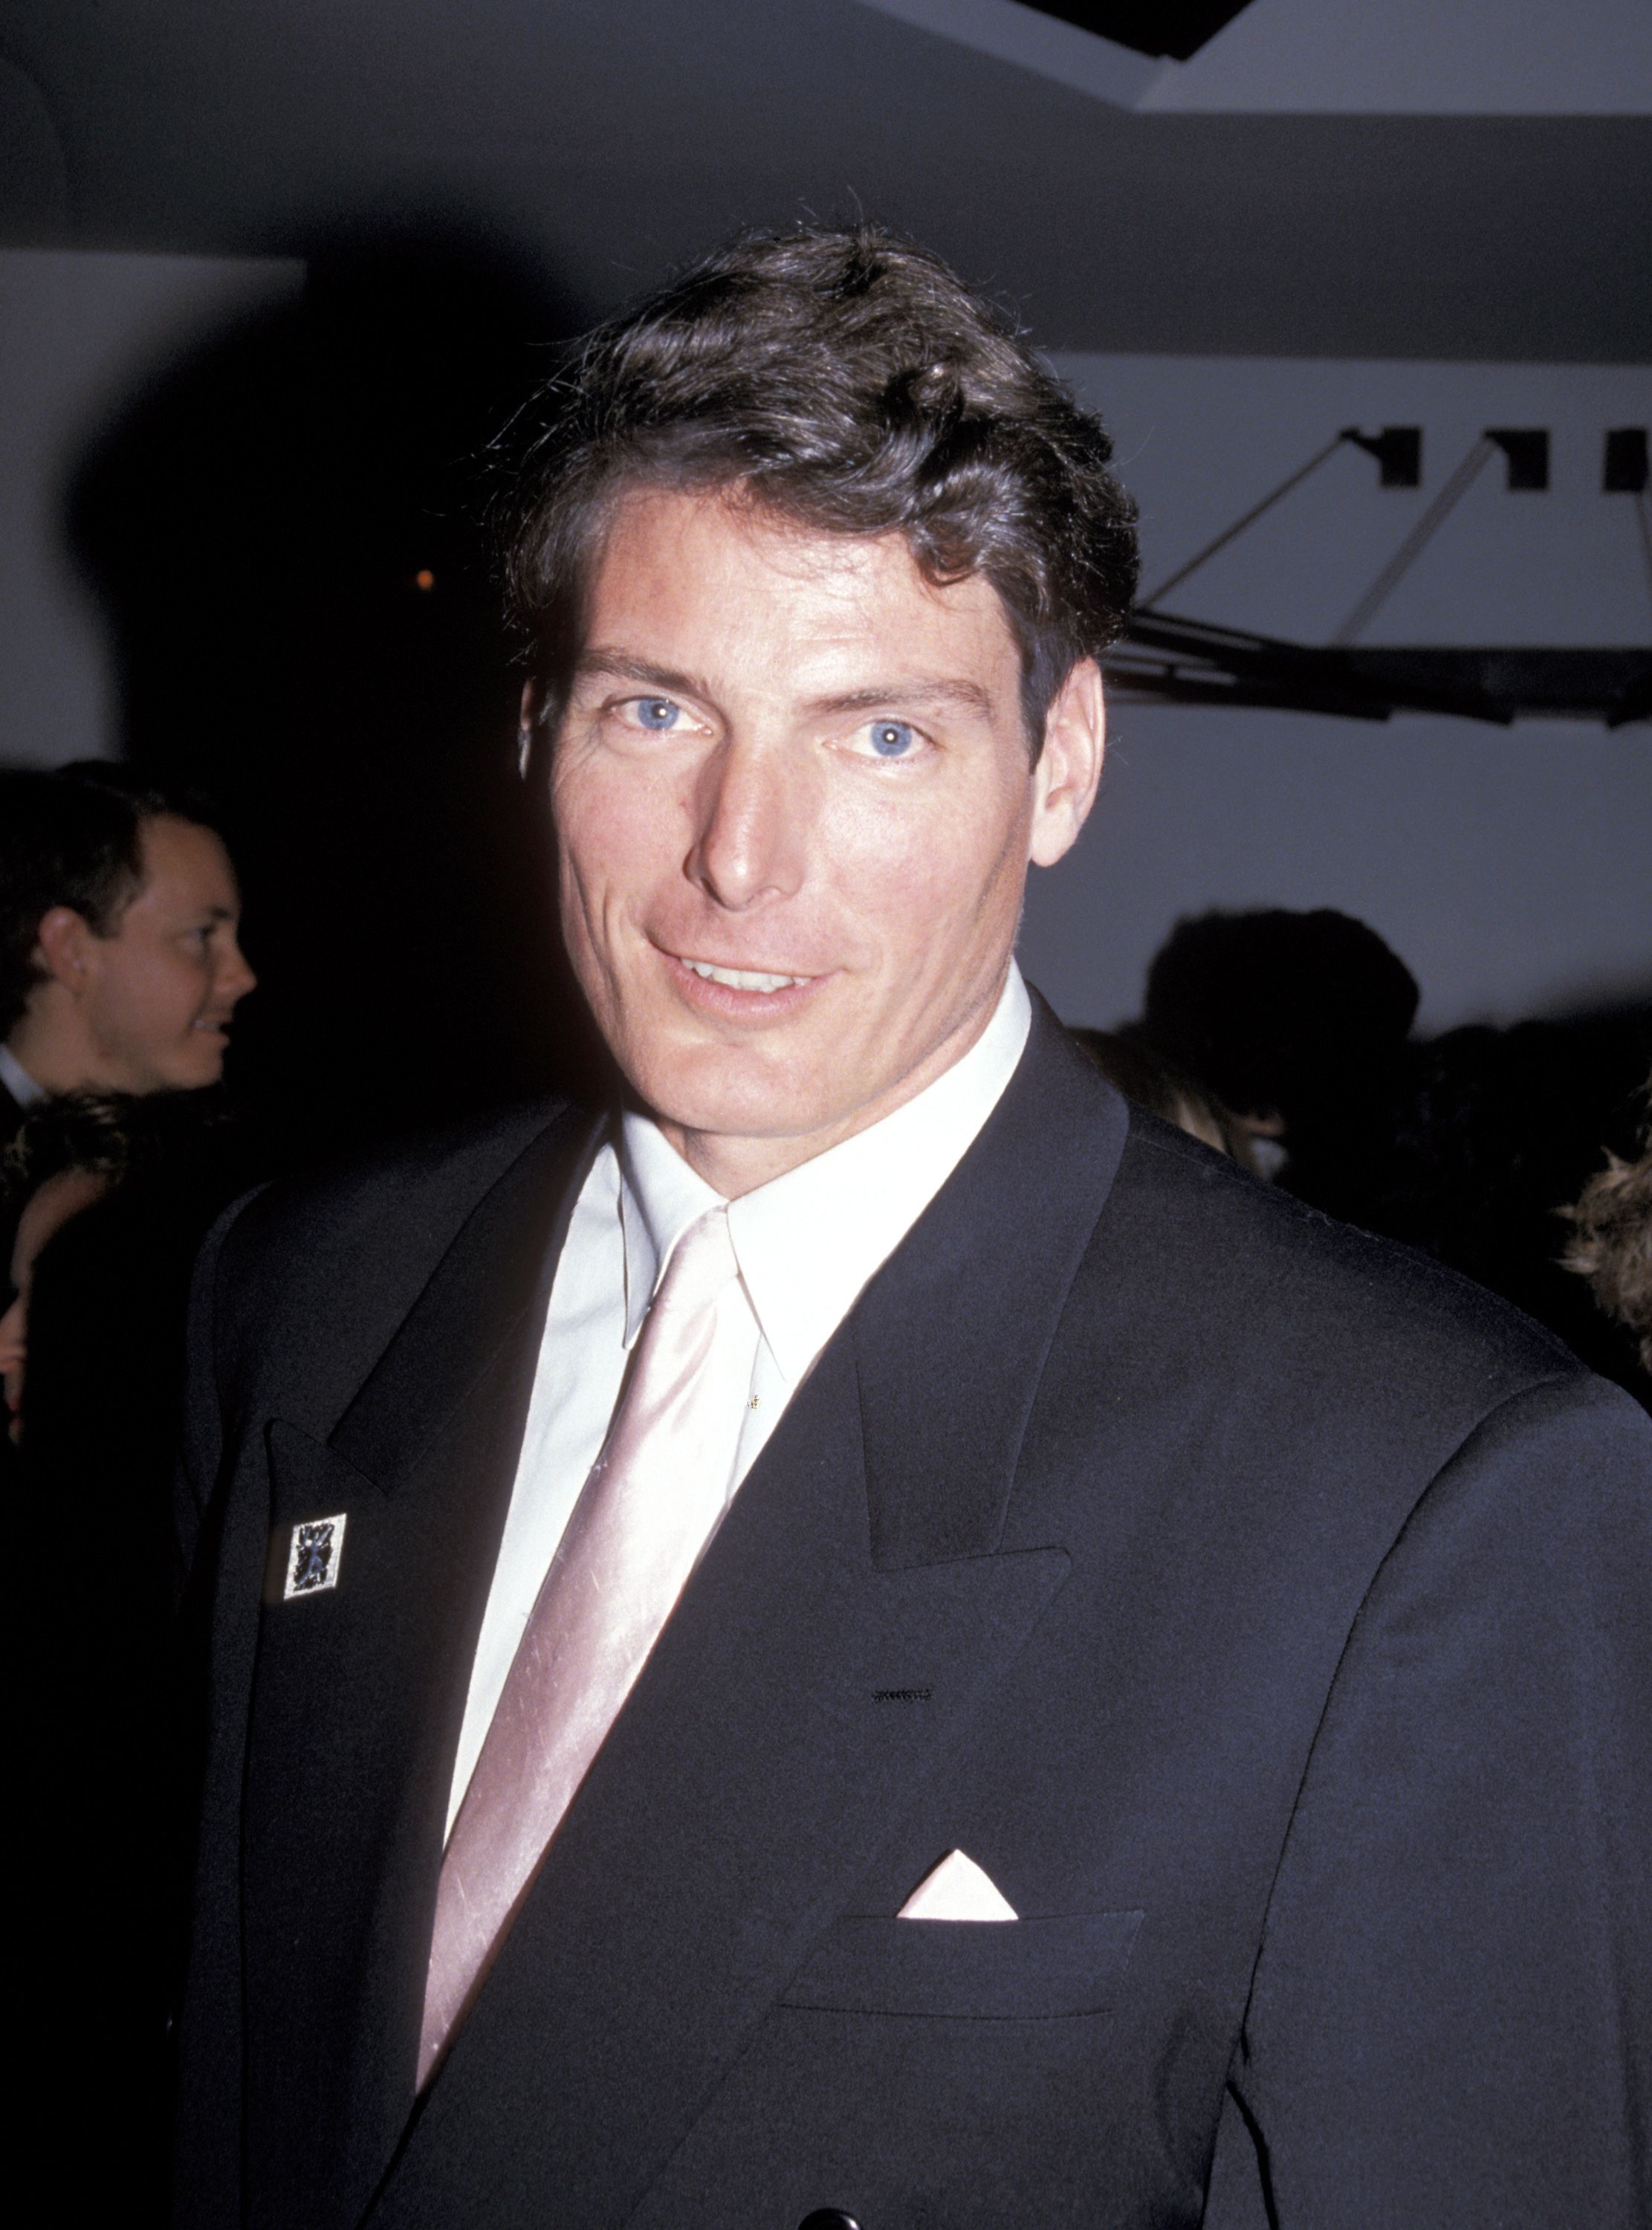 https://hips.hearstapps.com/hmg-prod/images/christopher-reeve-during-the-63rd-annual-academy-awards-news-photo-1684799172.jpg